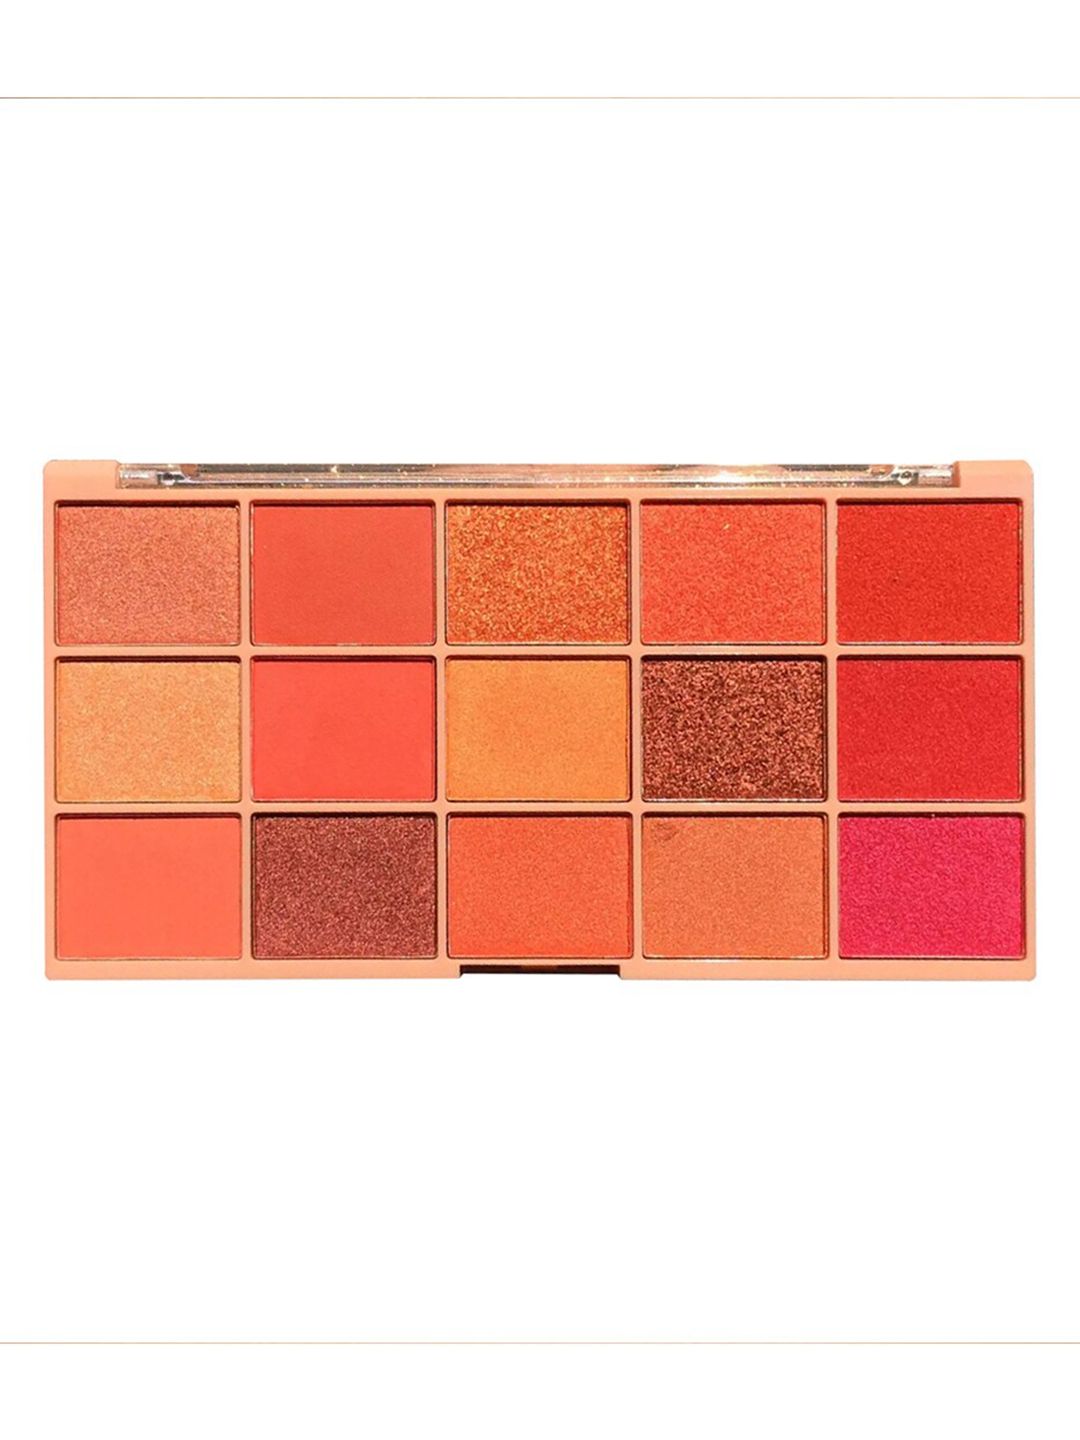 Sivanna Colors Ultra Professional Luxuriant Eye Shadow Palette - HF3011 03 Price in India